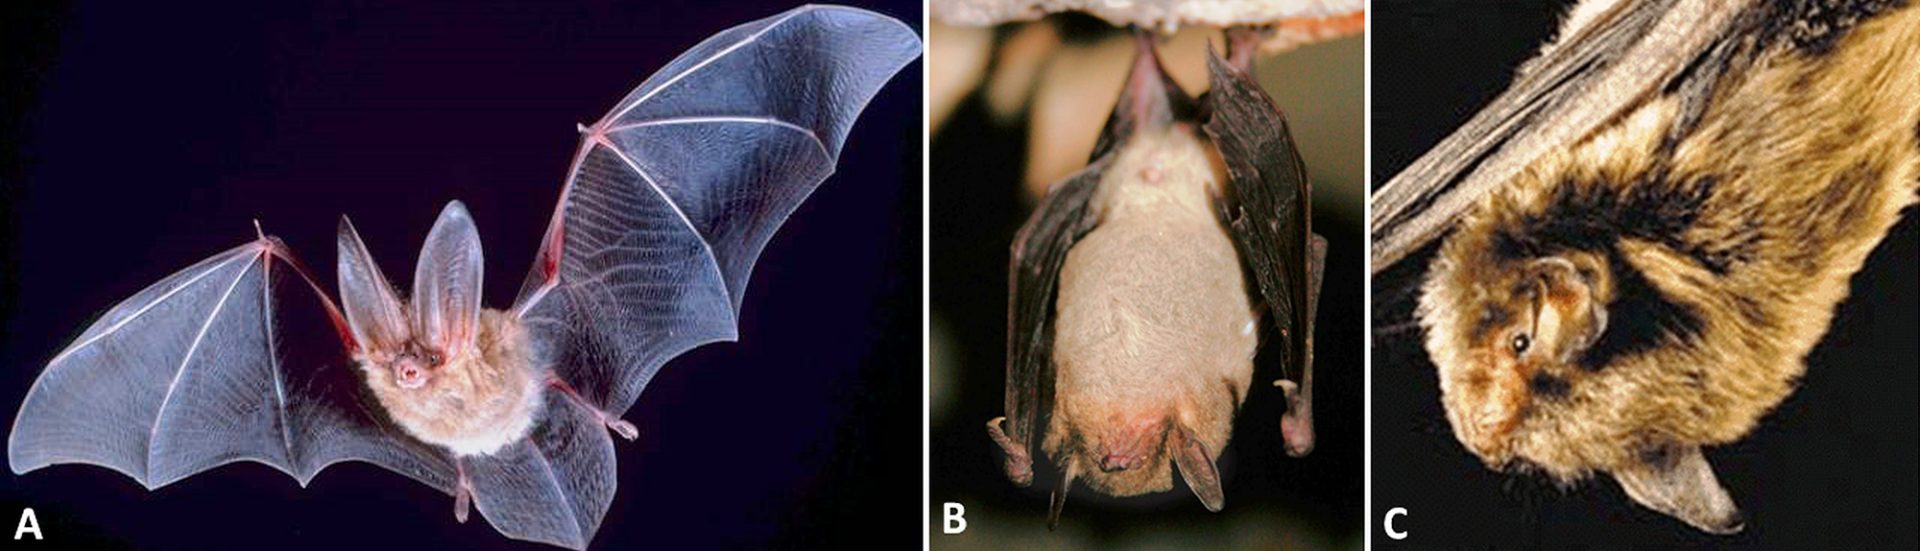 Types of bat with corresponding letters